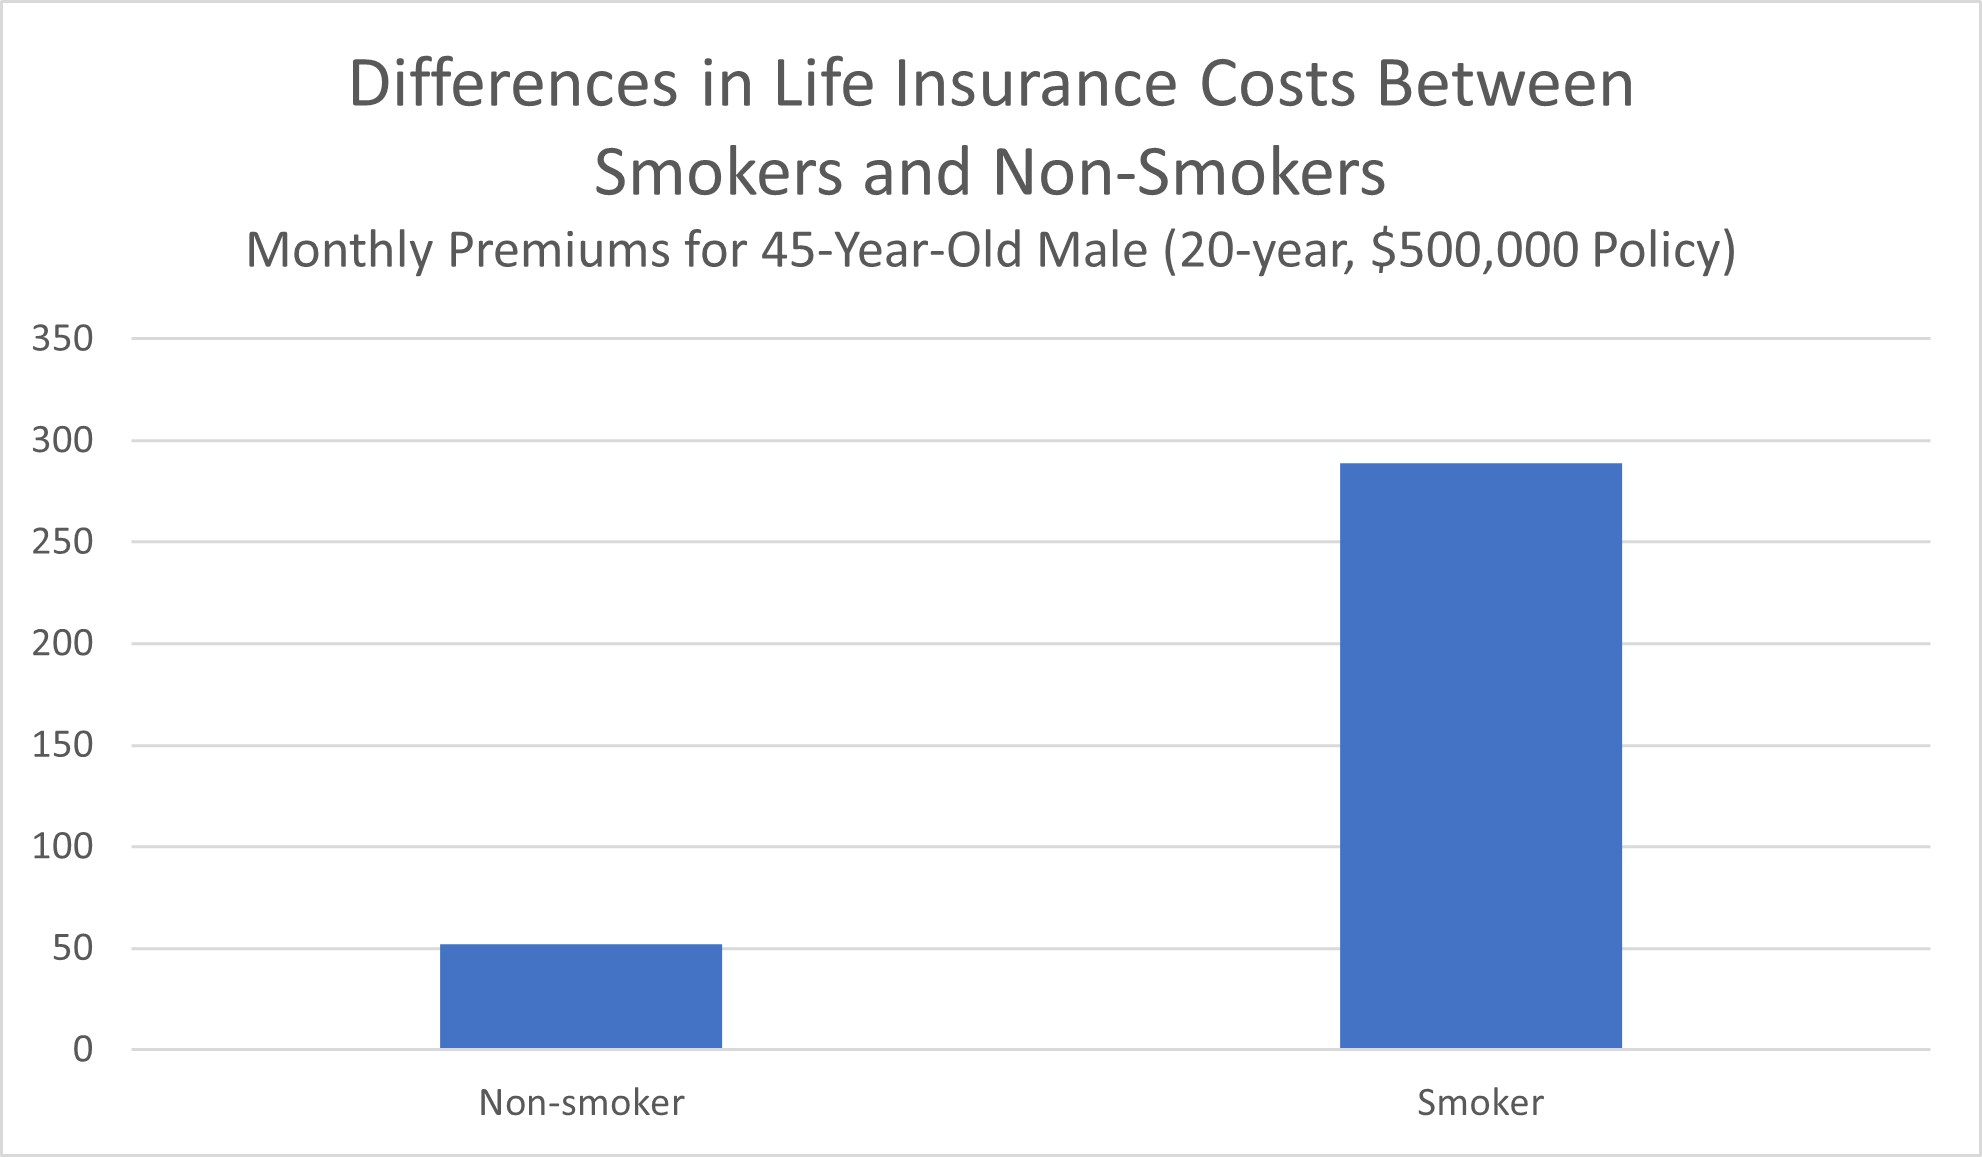 Differences in Life Insurance Costs Between Smokers and Non-Smokers